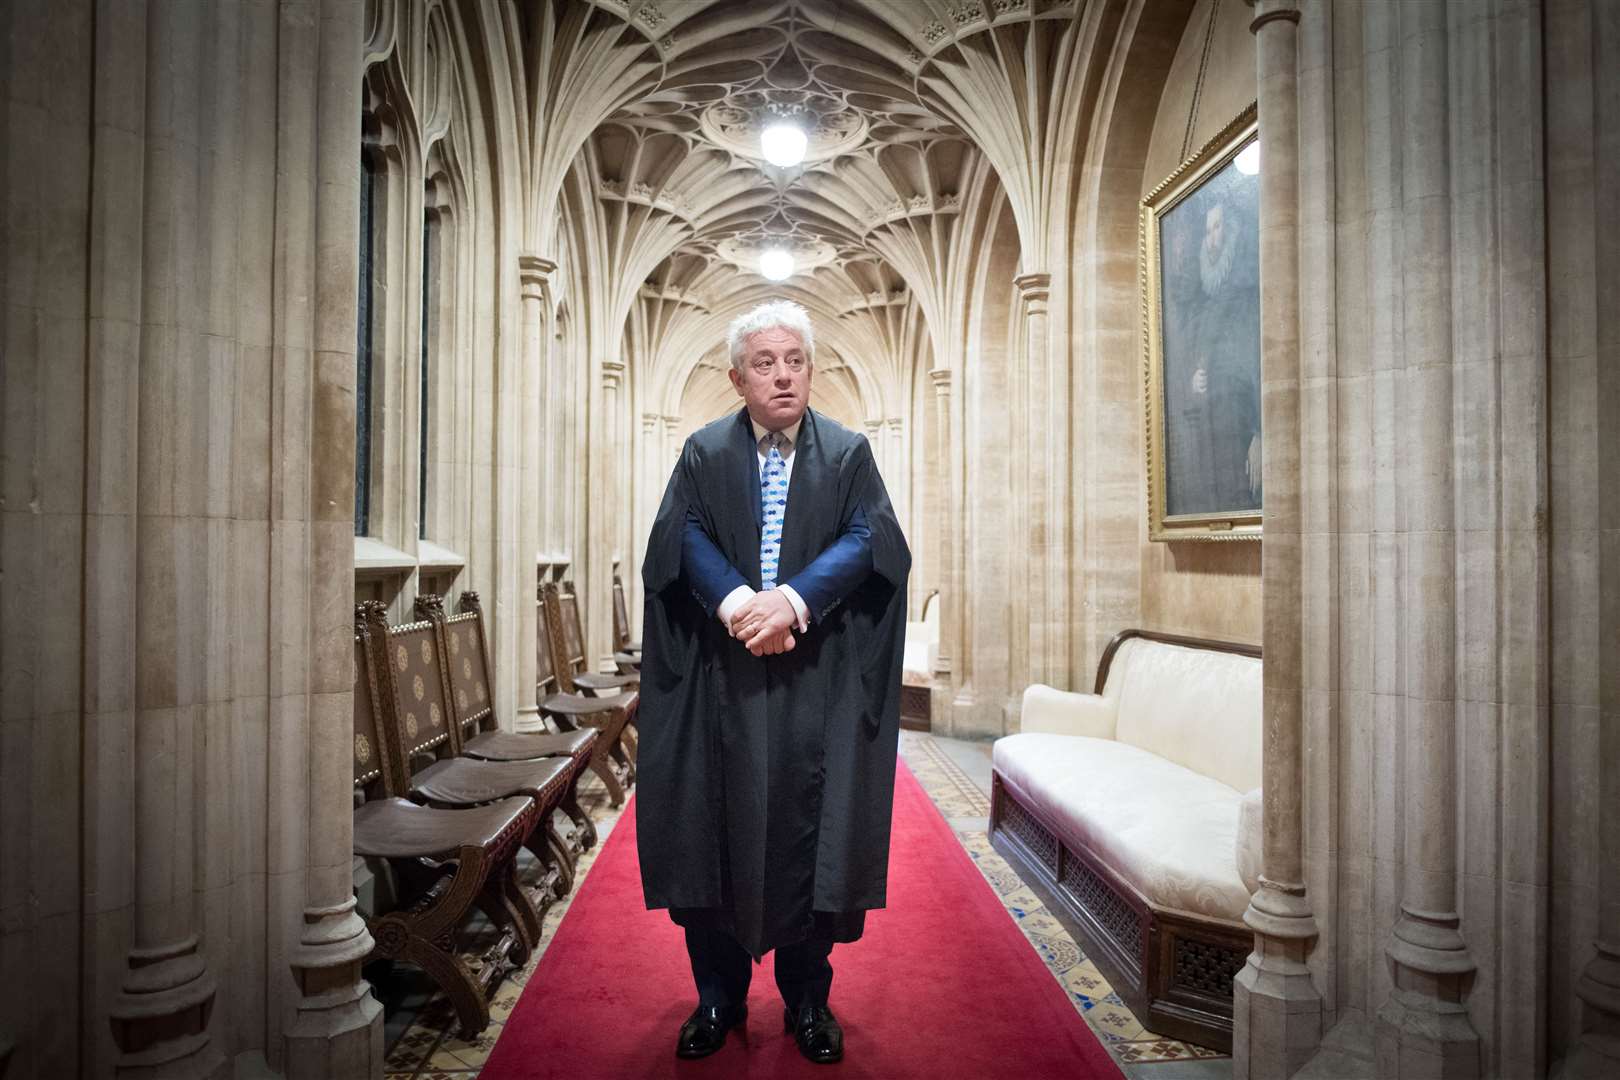 John Bercow goes through his daily routine of preparing for President the day's events in the House of Commons (Stefan Rousseau / PA)